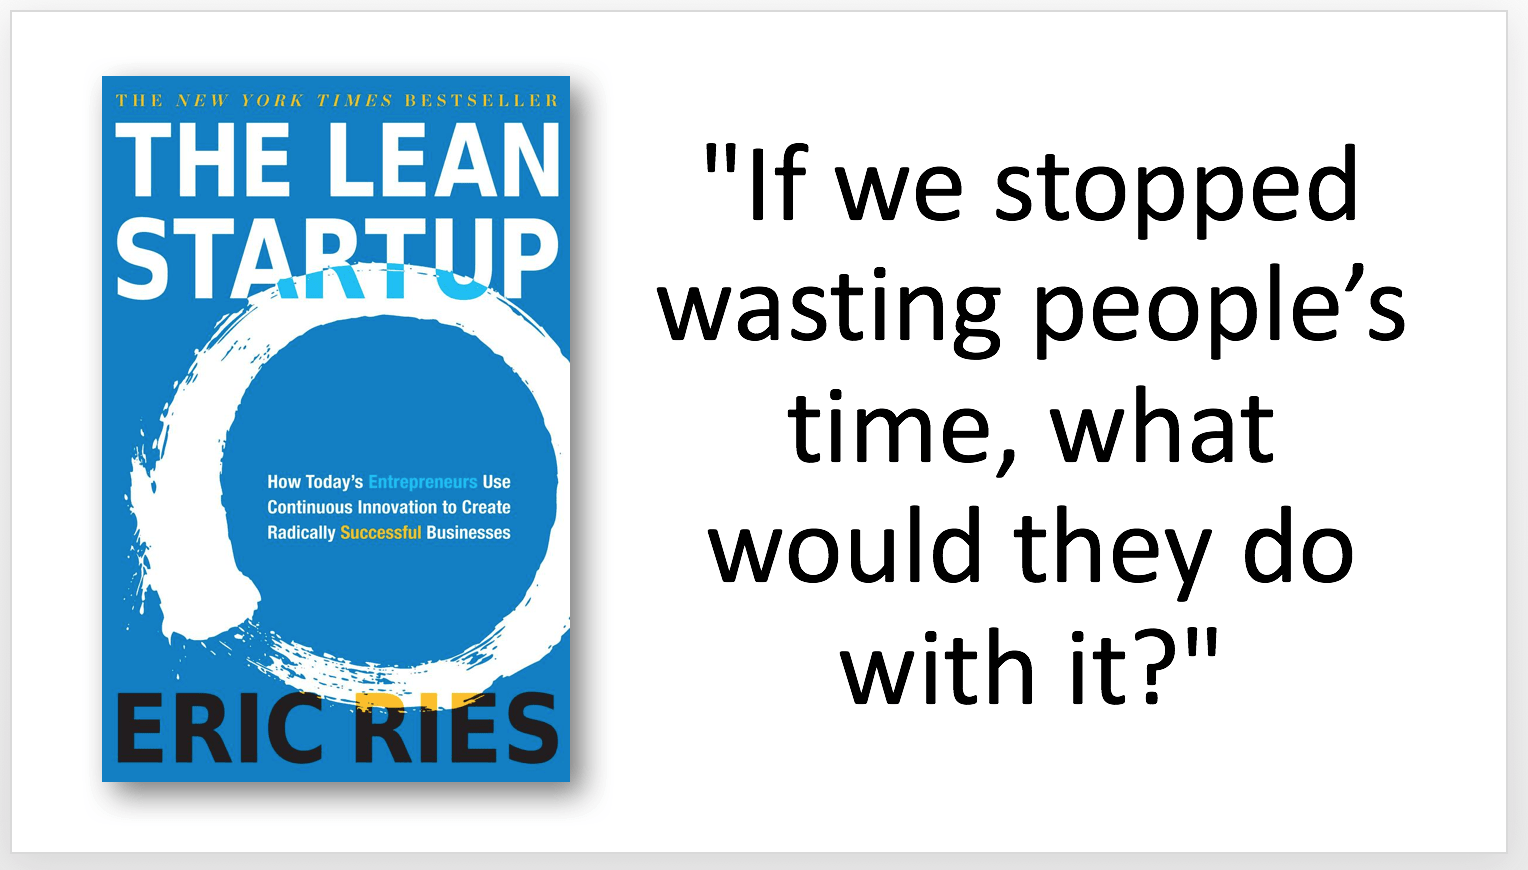 "If we stopped wasting people's time, what would they do with it?"